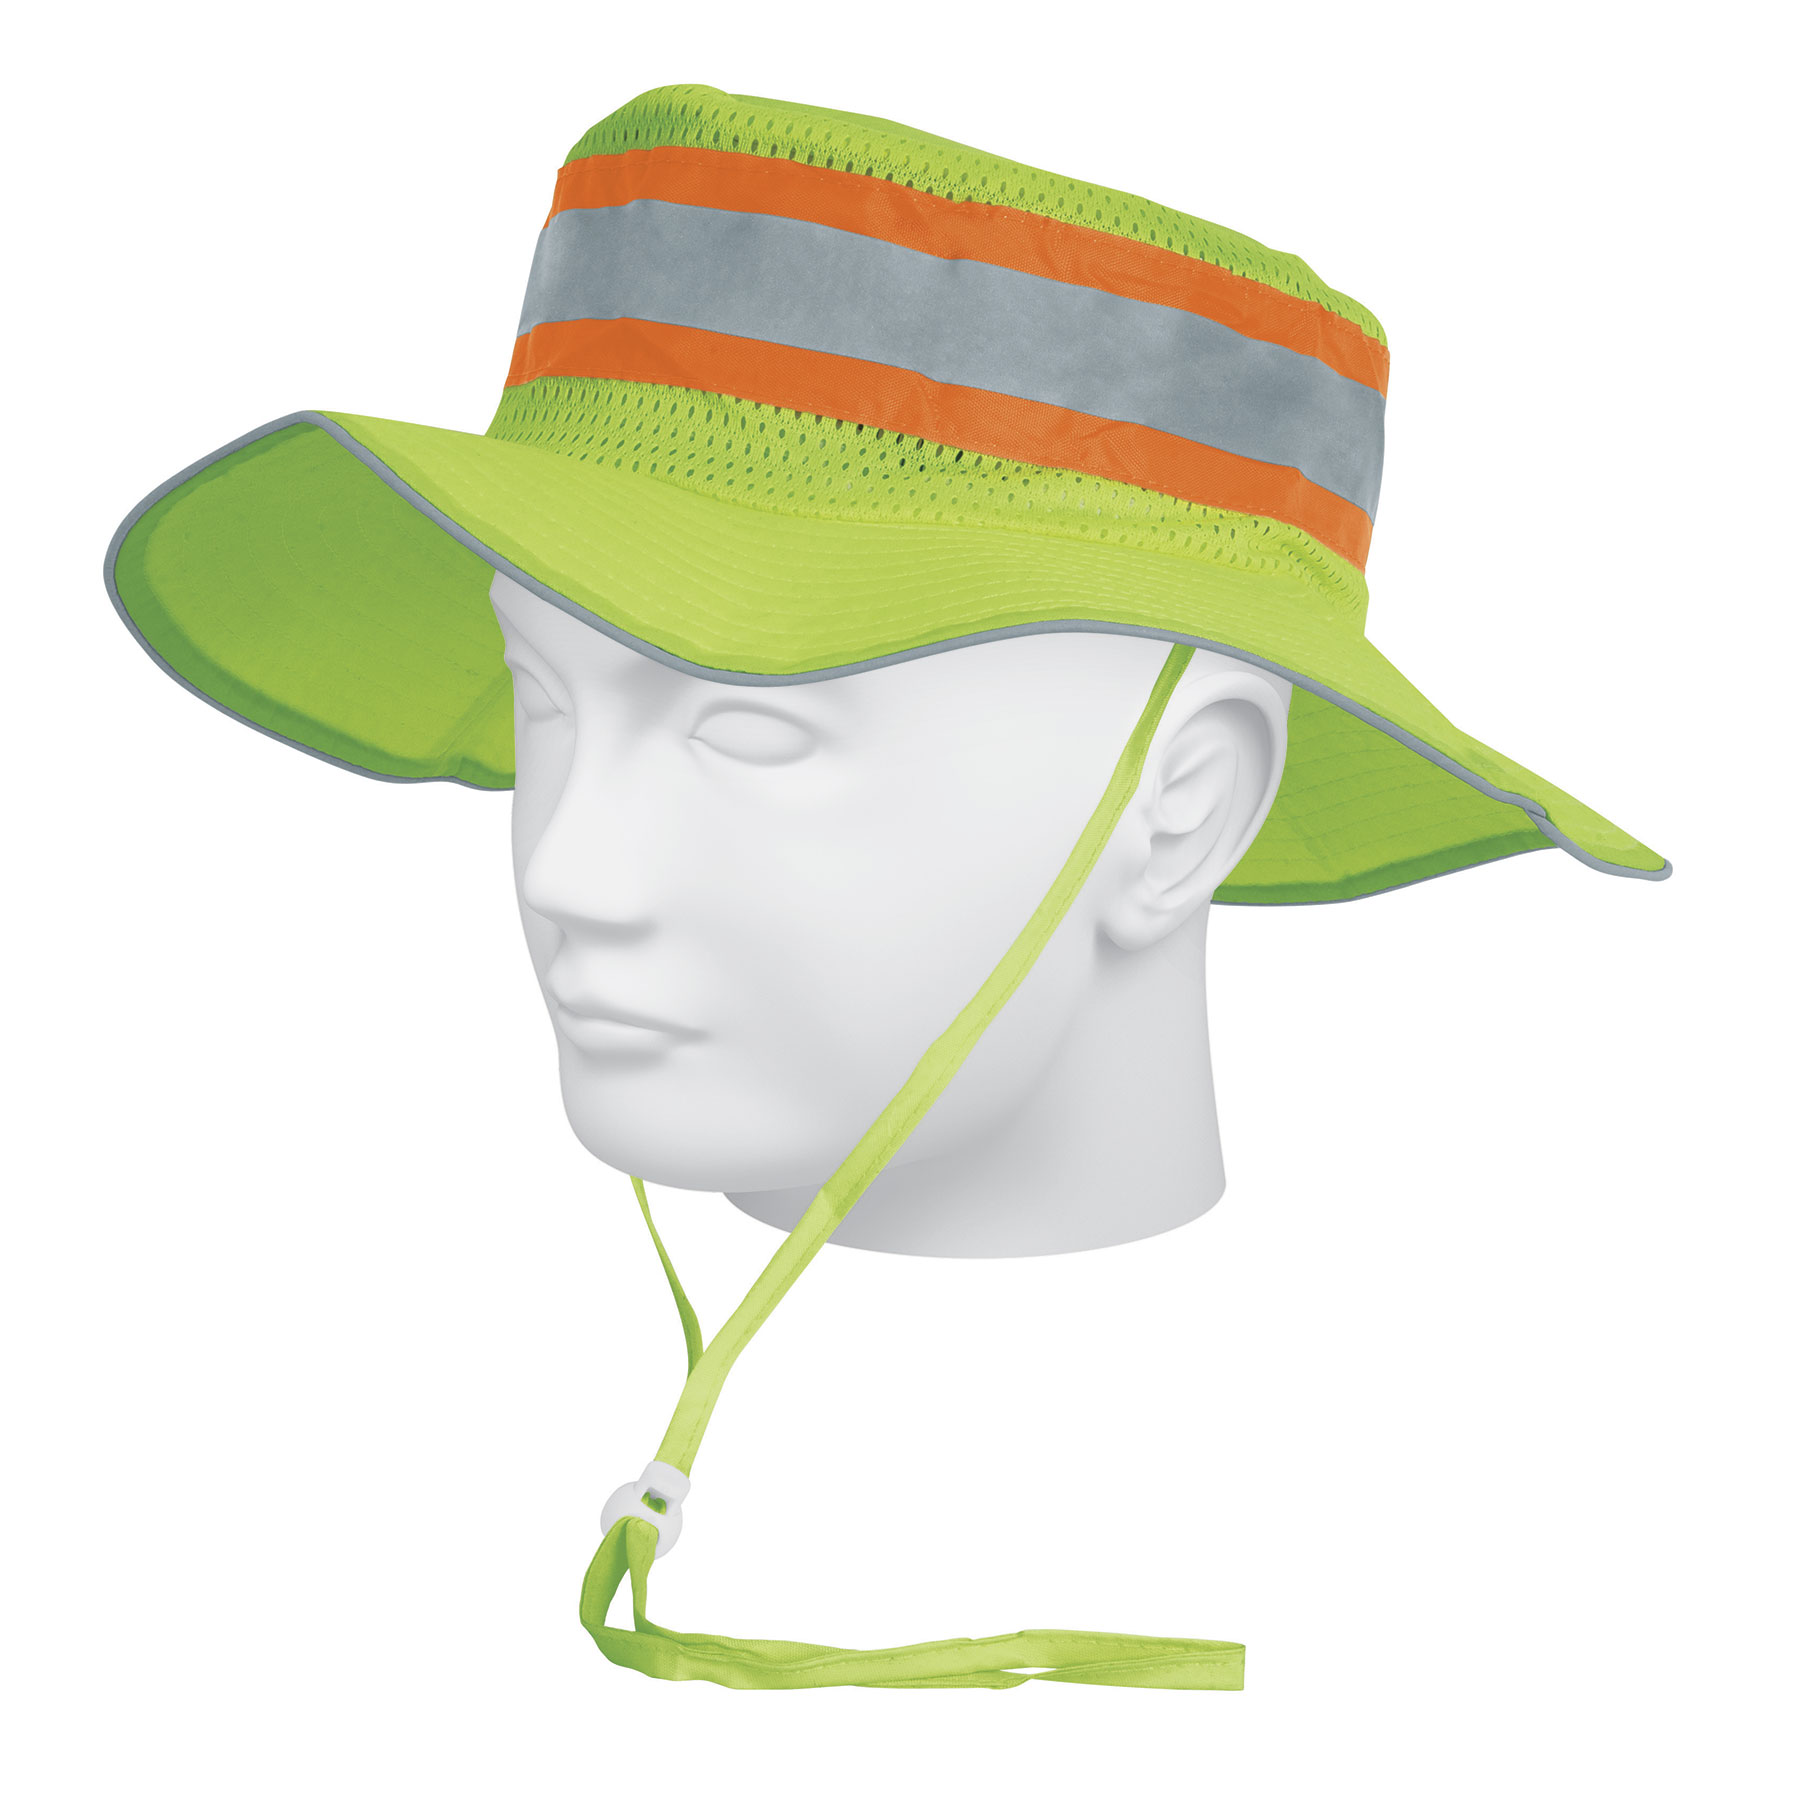 High Visibility Hat with Reflective Truper